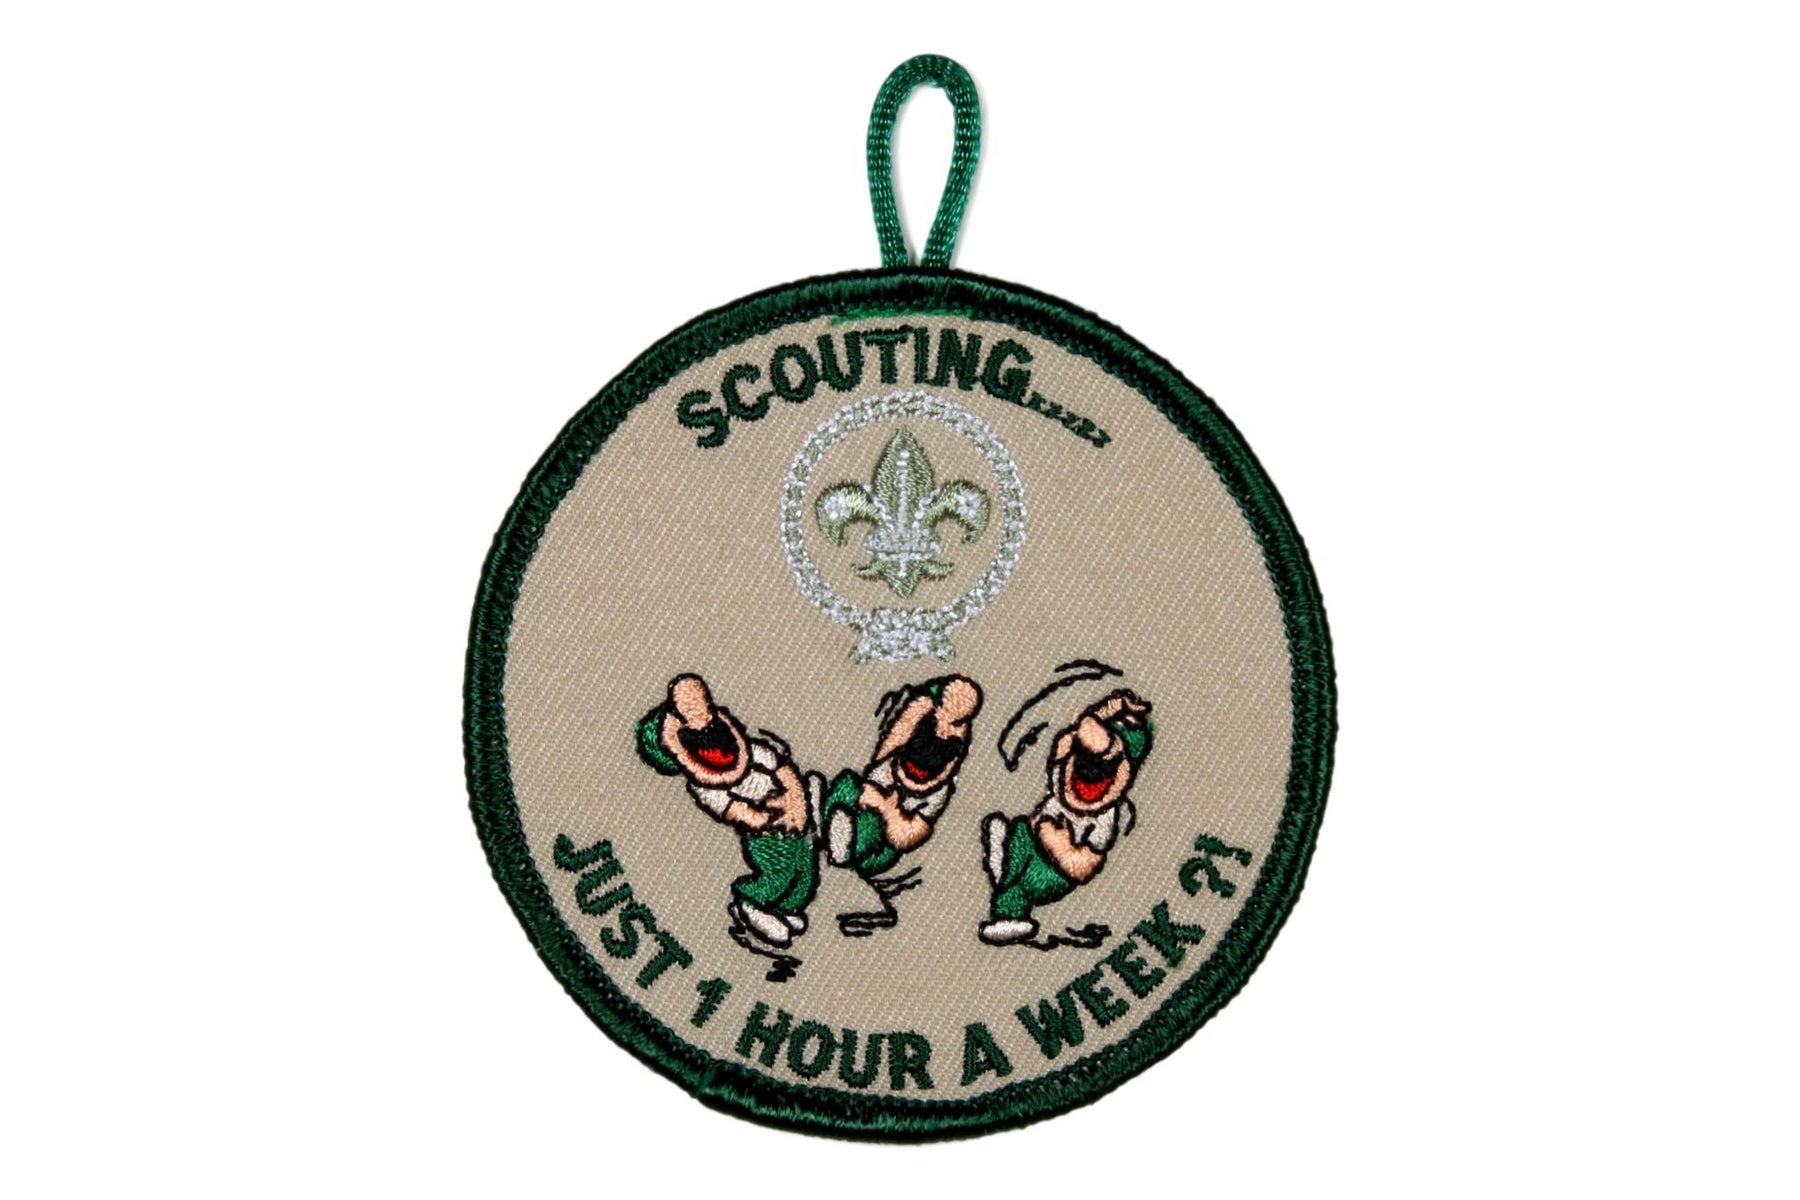 !Scouting Just One Hour a Week Patch - Funny Badge